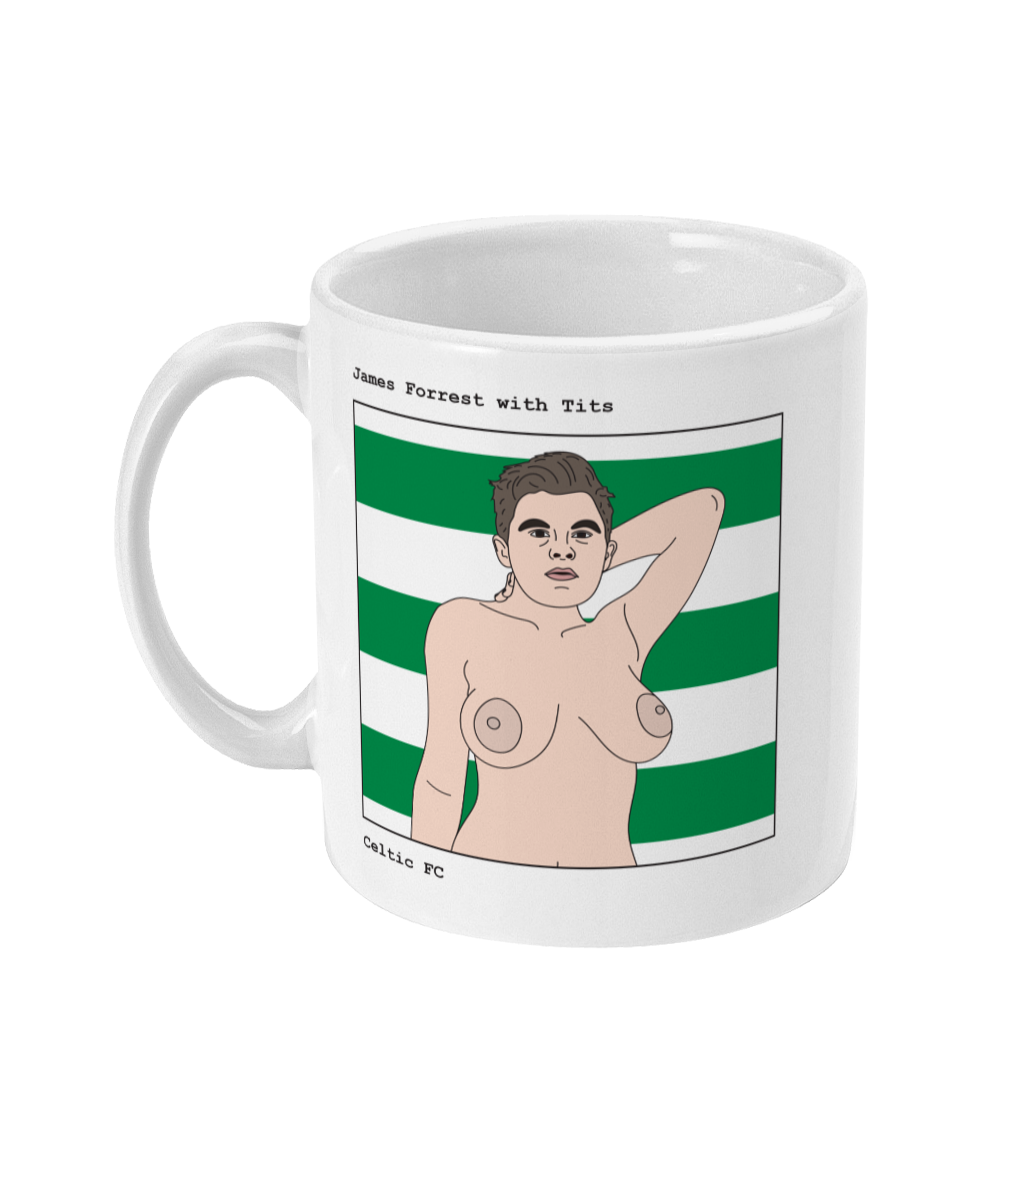 James Forrest with Tits